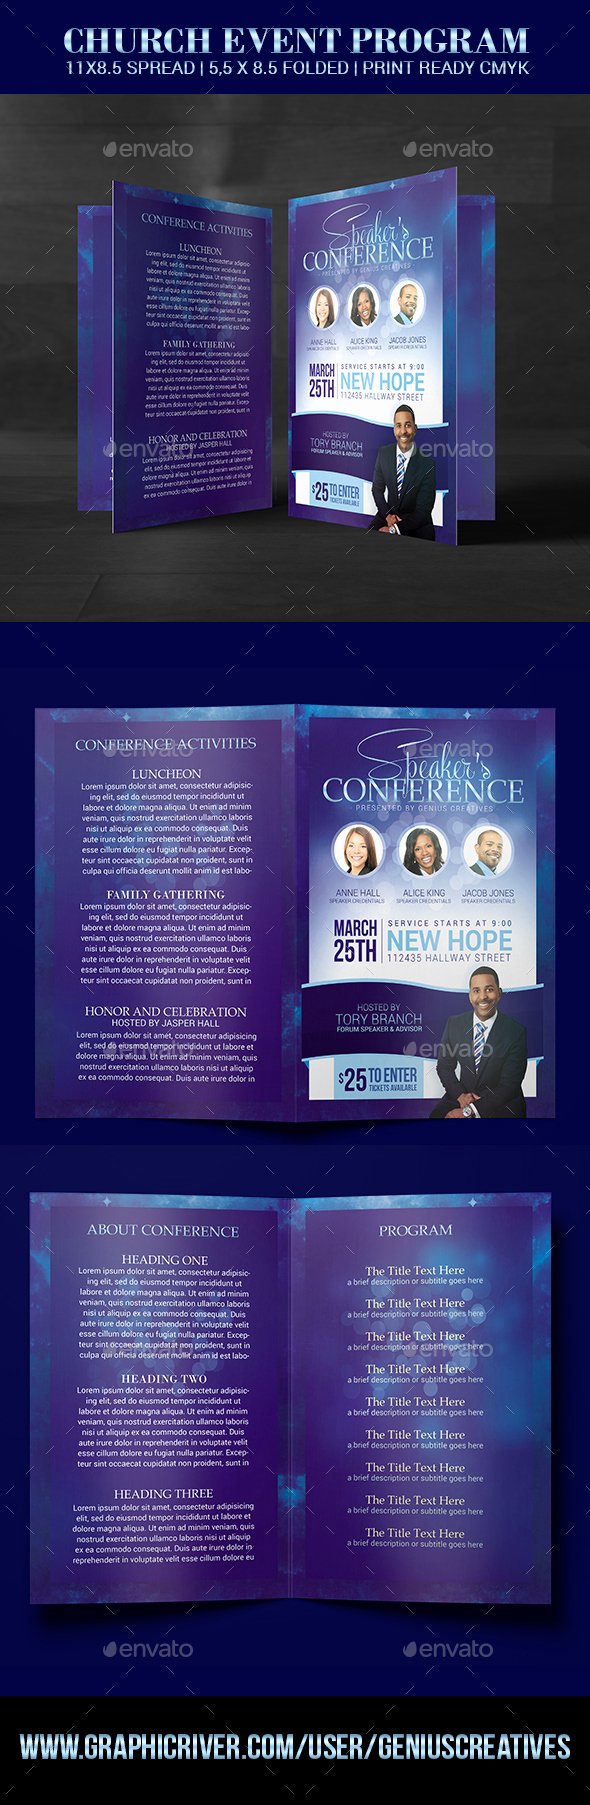 Conference Program Book Template Lovely Church Conference Program Template by Geniuscreatives